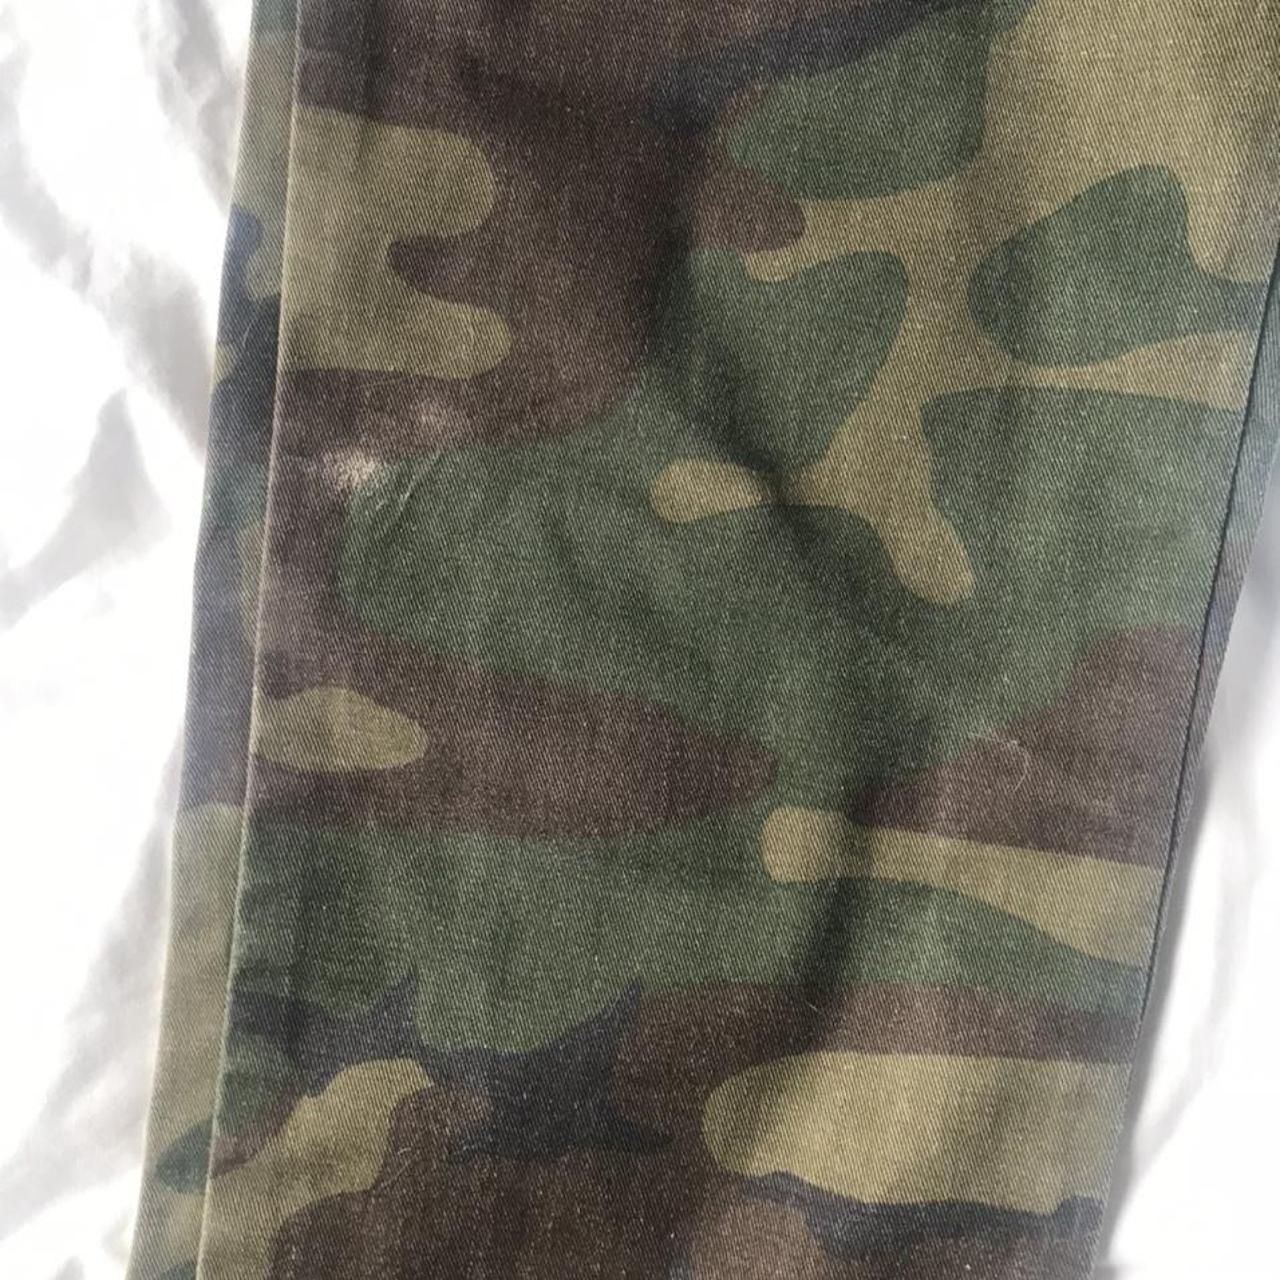 Supreme Camo Work Pant from their fall ‘14 drop. - Depop